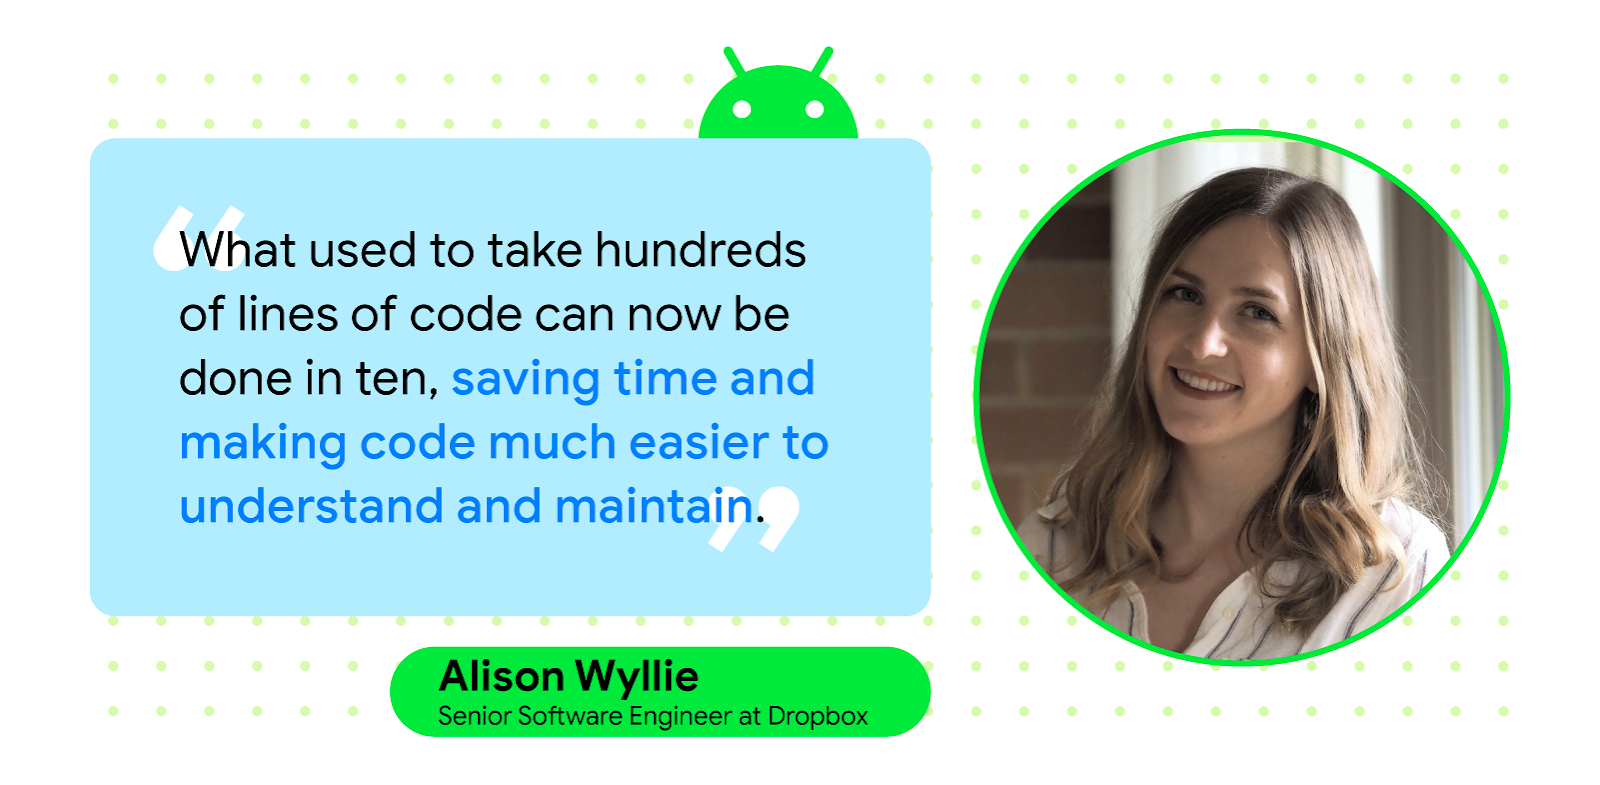 Quote card with headshot of Alison Wyllie, smiling. Quote text reads, 'What used to take hundreds of lines of code can now be done in ten, saving time and making code much easier to understand and maintain'- Alison Wyllie, Senior Software Engineer at Dropbox